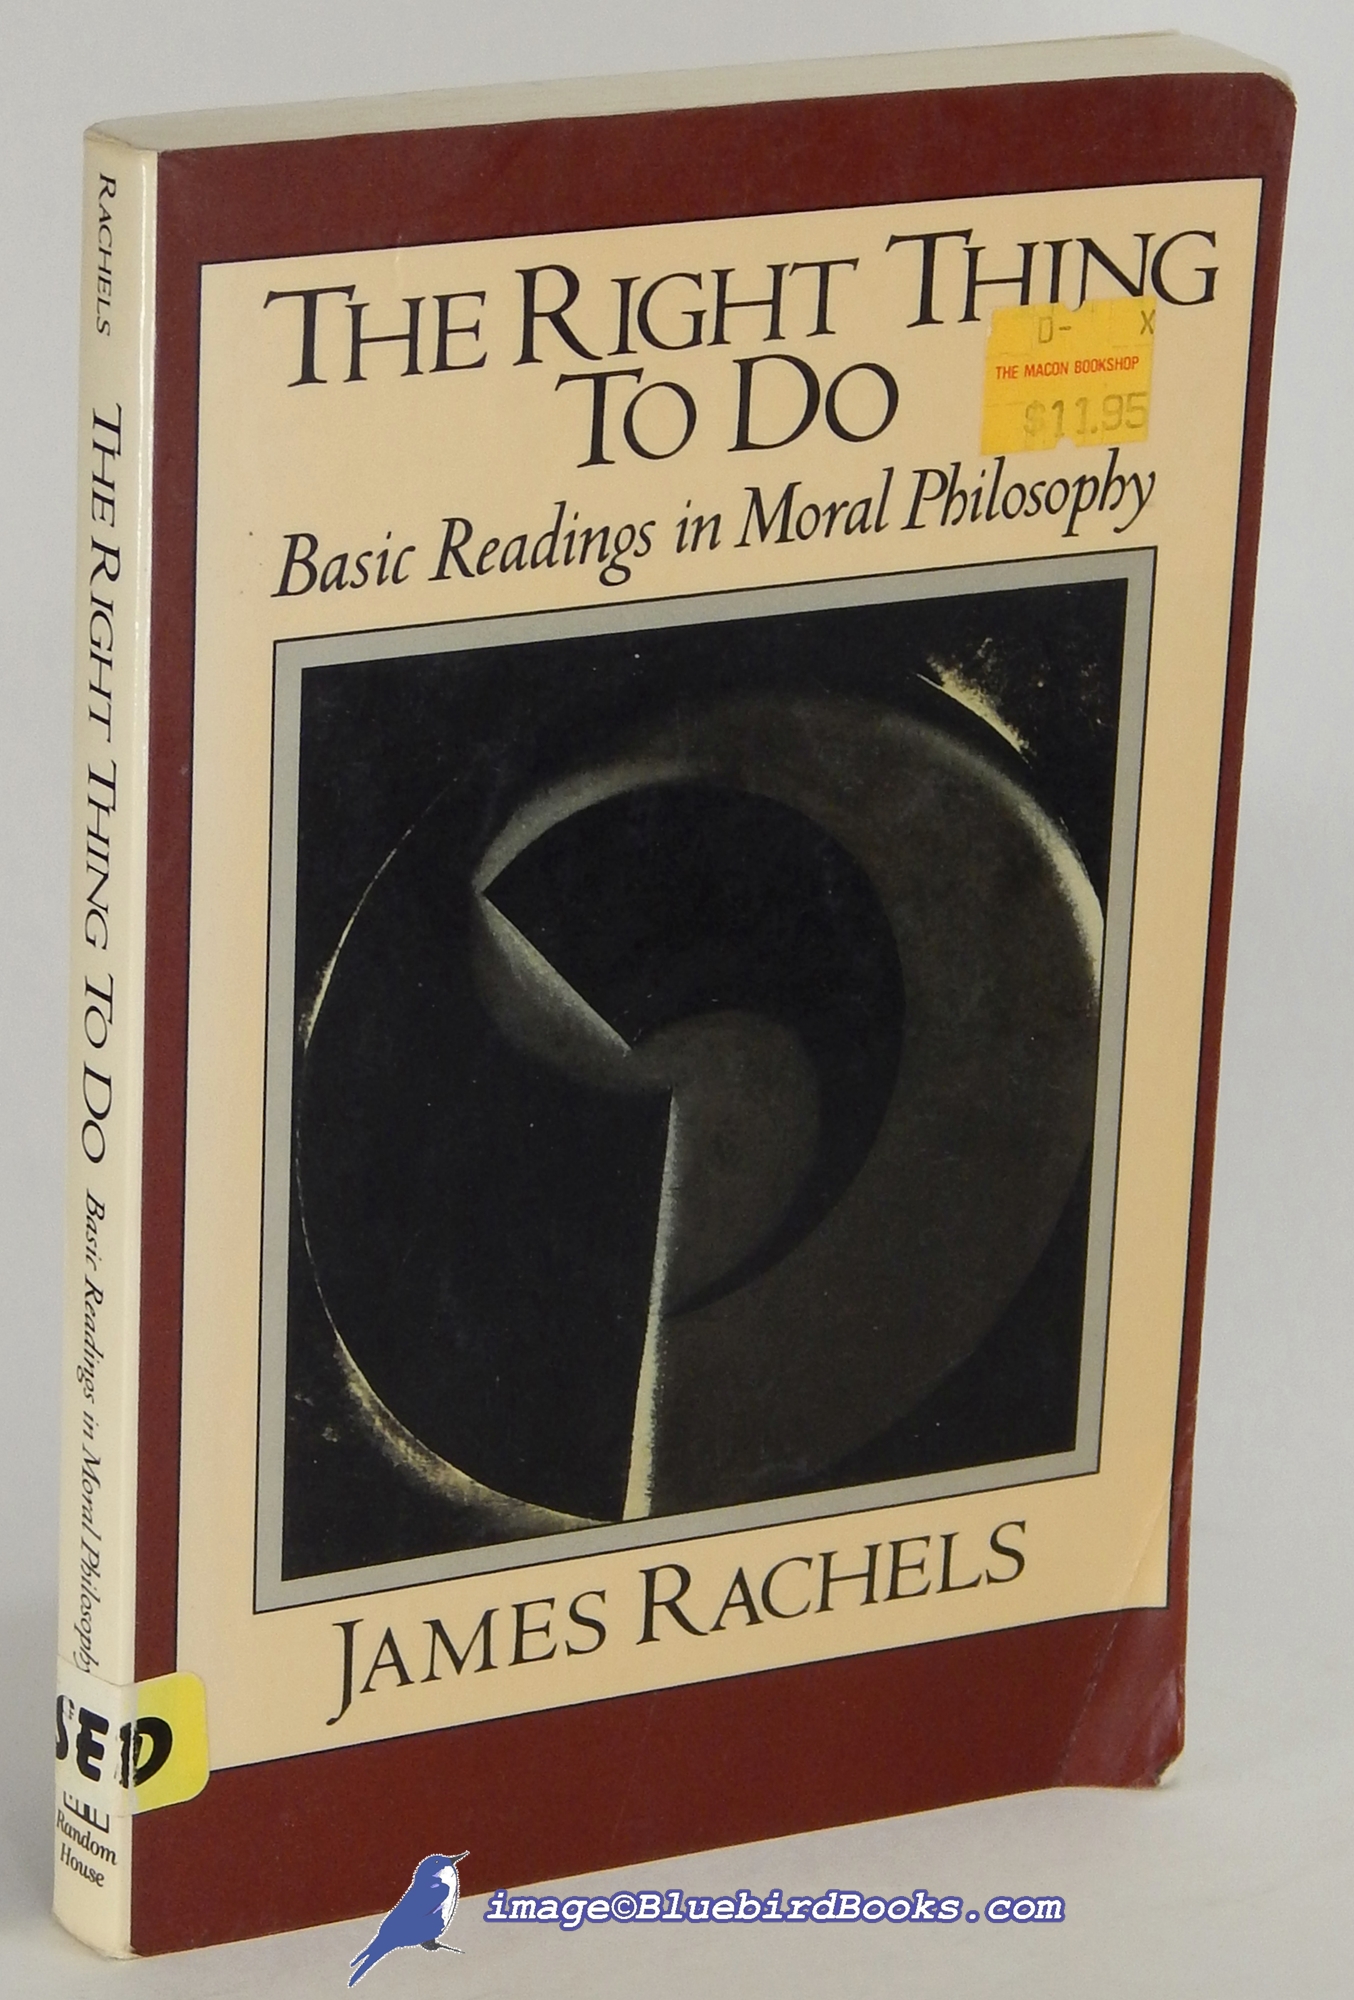 RACHELS, JAMES - The Right Thing to Do: Basic Readings in Moral Philosophy